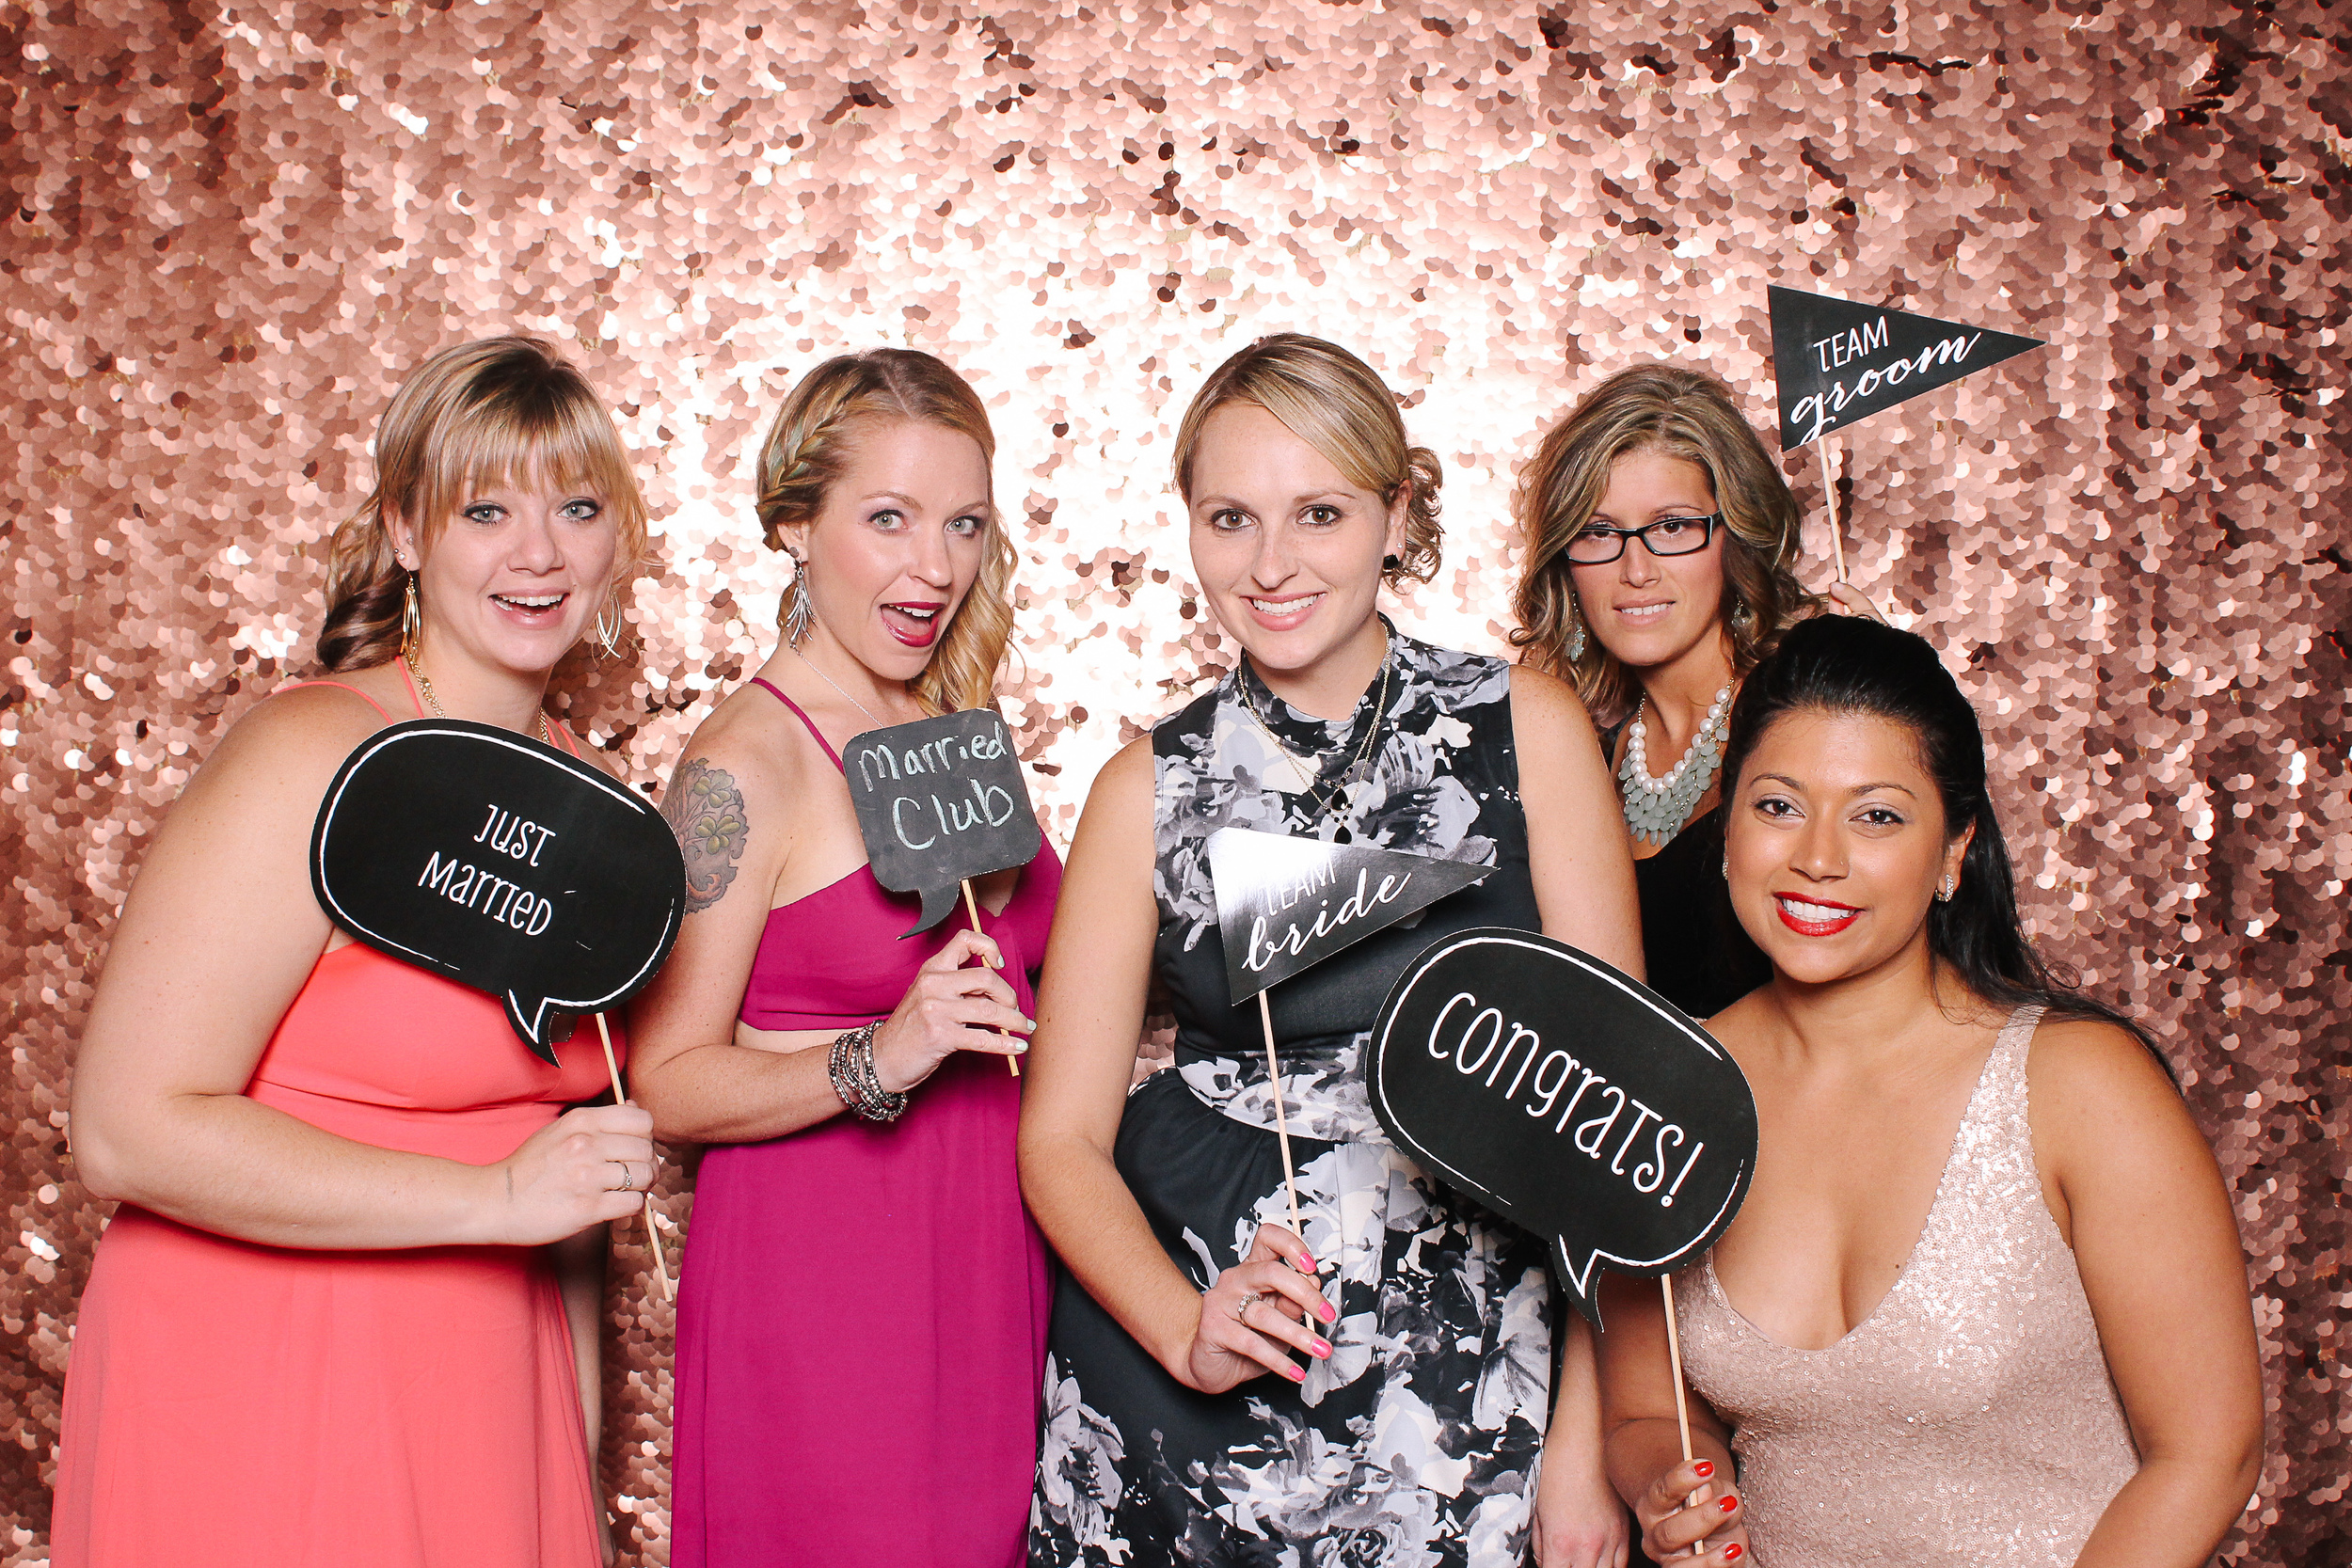 00009-Cleveland Wedding Photo Booth Open Air at Windows on the River-20150926.jpg